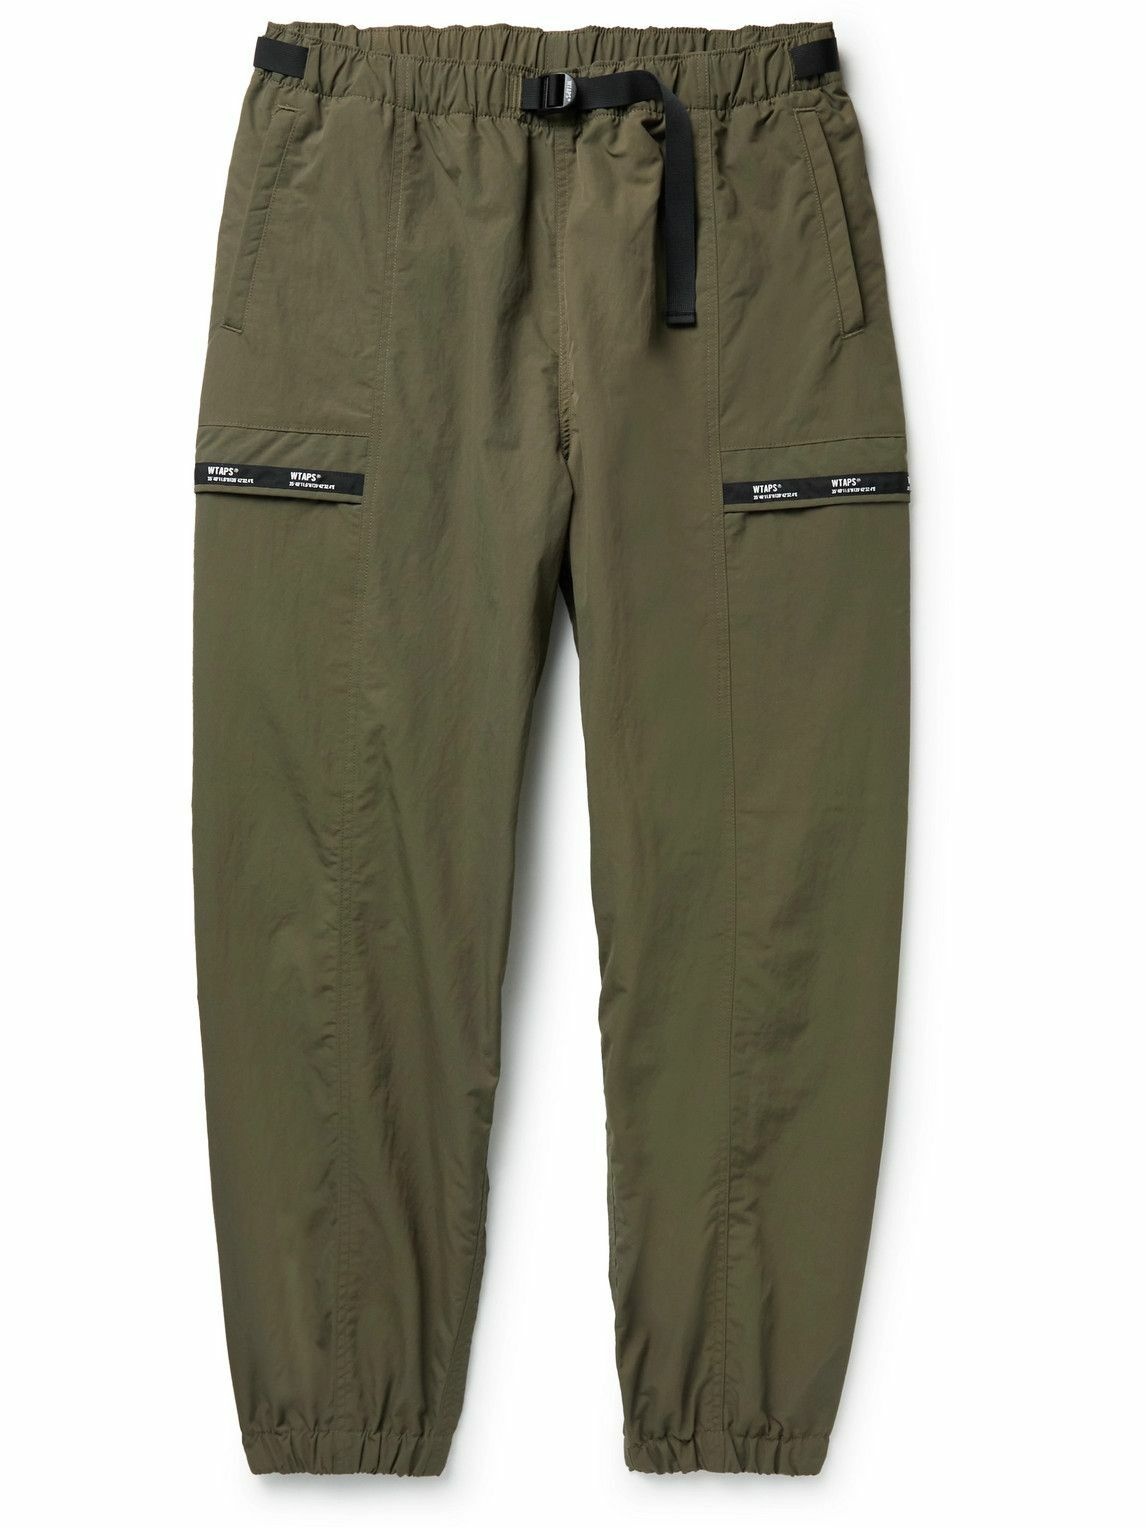 WTAPS - Tapered Belted Nylon Cargo Trousers - Black WTAPS